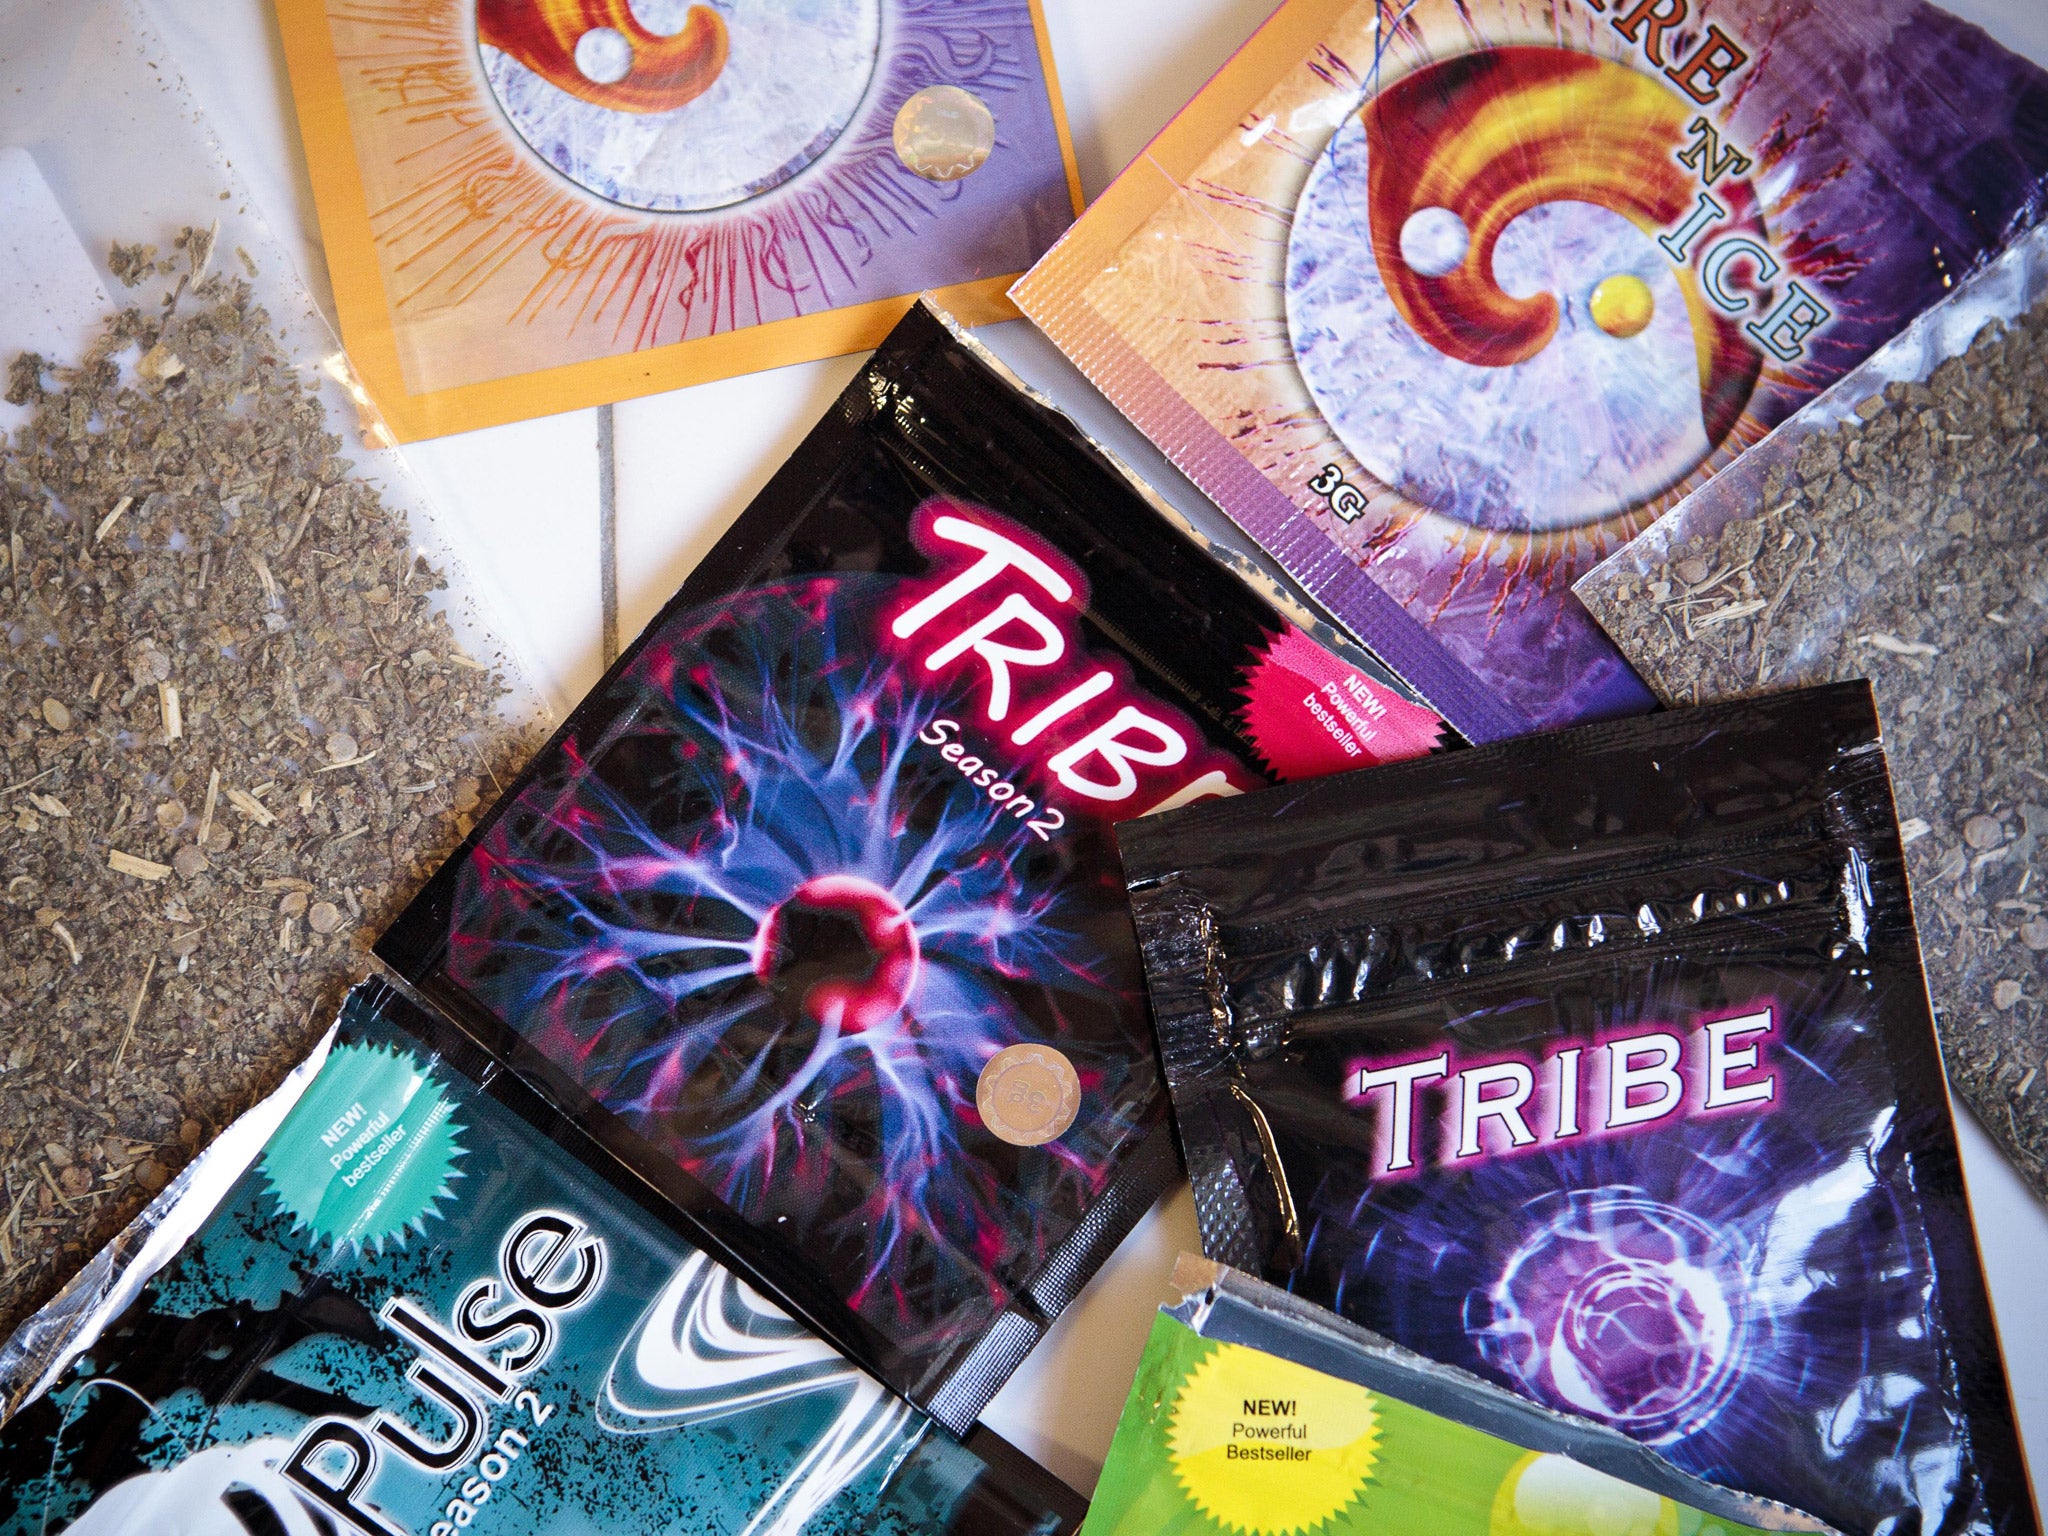 An average of one new 'legal high' goes on sale every week